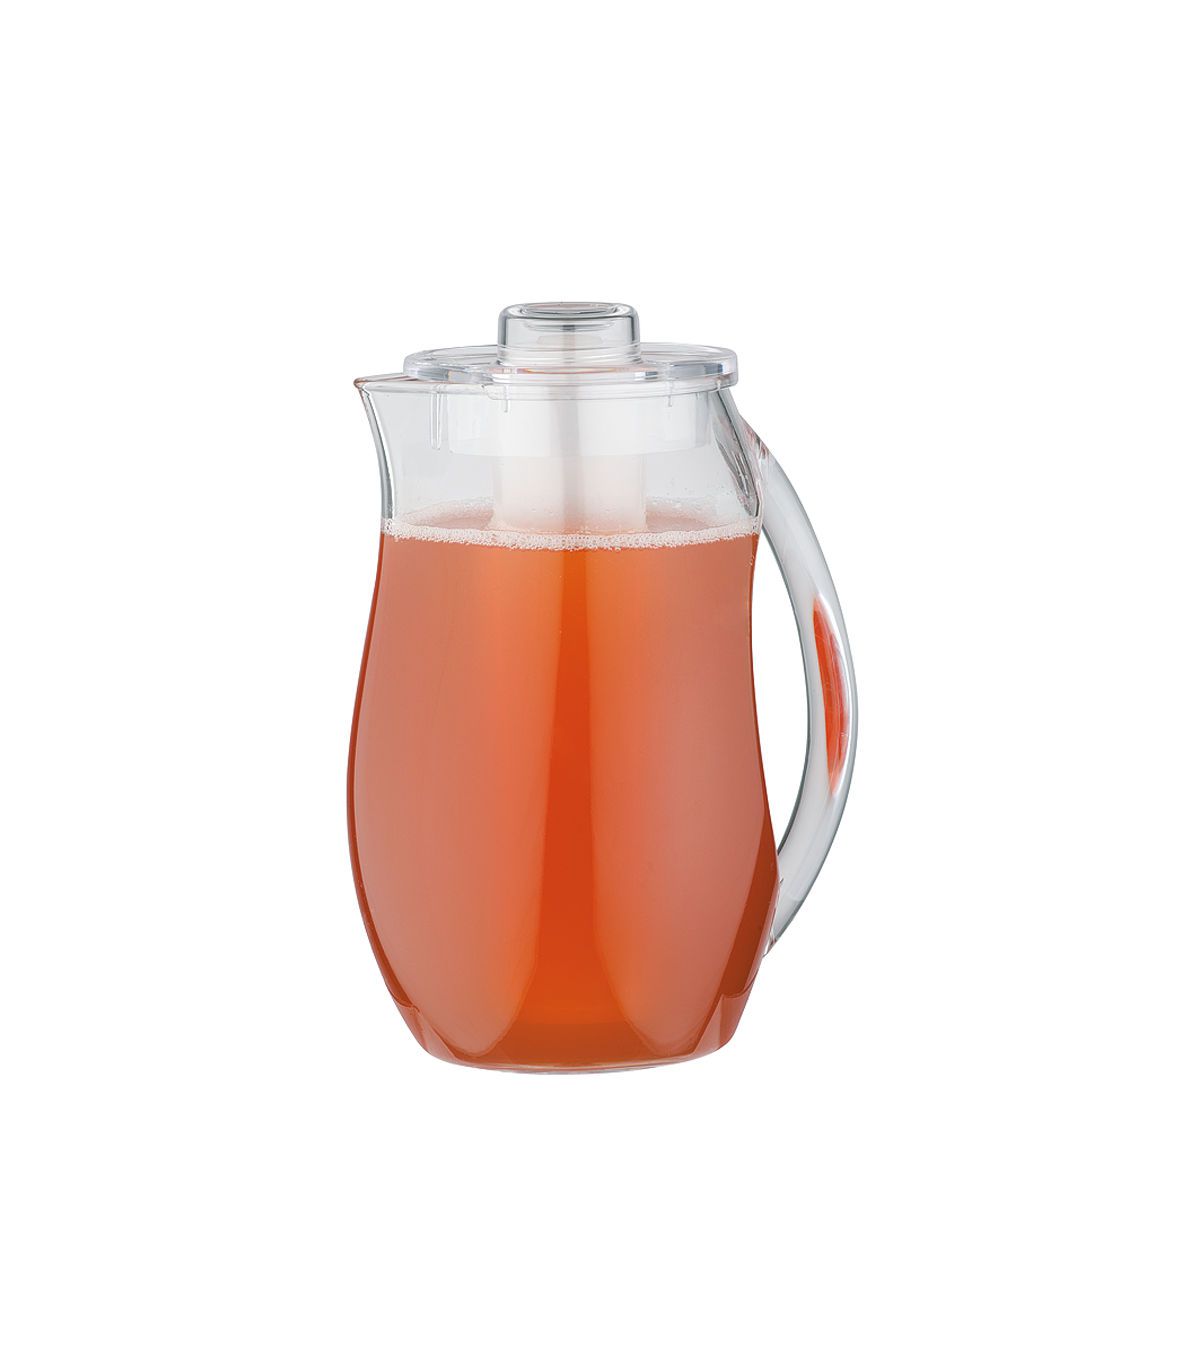 https://www.stellinox.com/533-superlarge_default/juice-water-pitcher-28-l-with-insert-for-ice-cubes.jpg